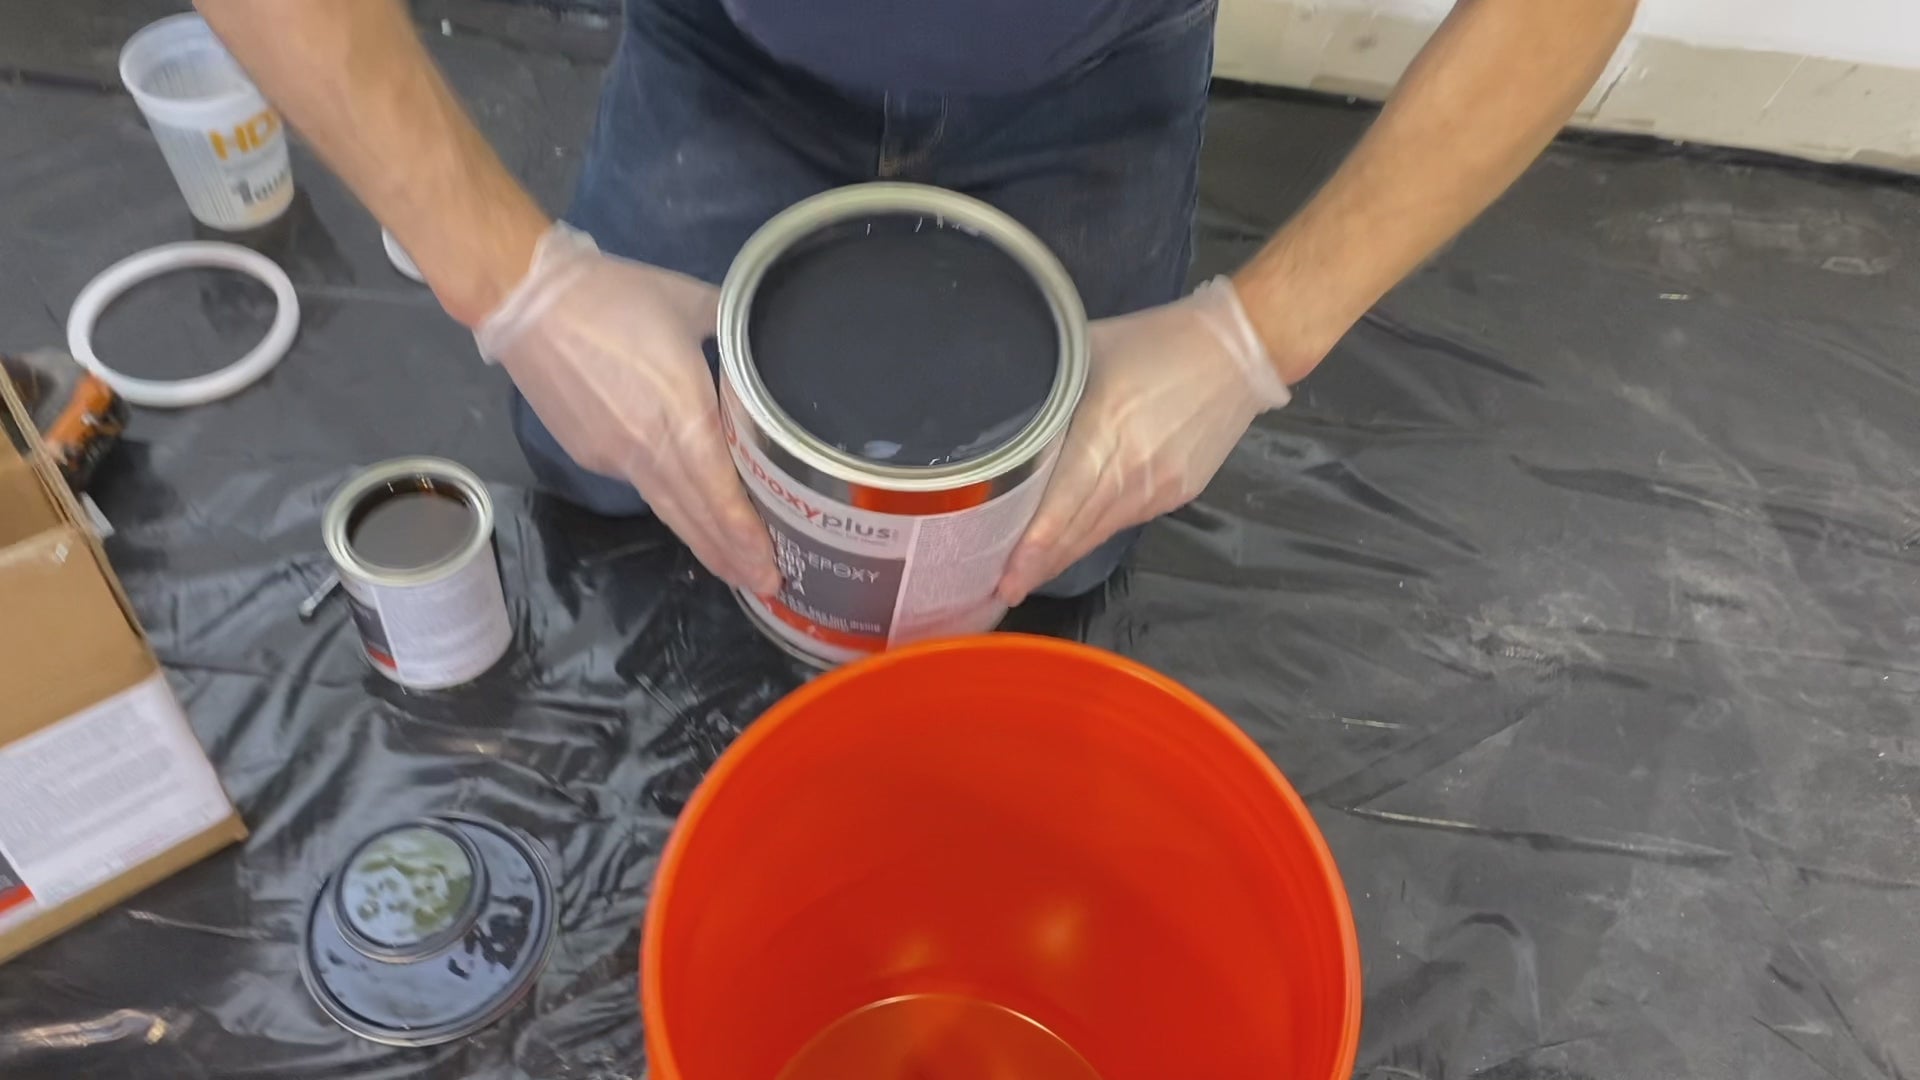 Enhance Spaces with BLACK - Water-Based Epoxy Kit Covers 400-500 sq. ft. per Gallon